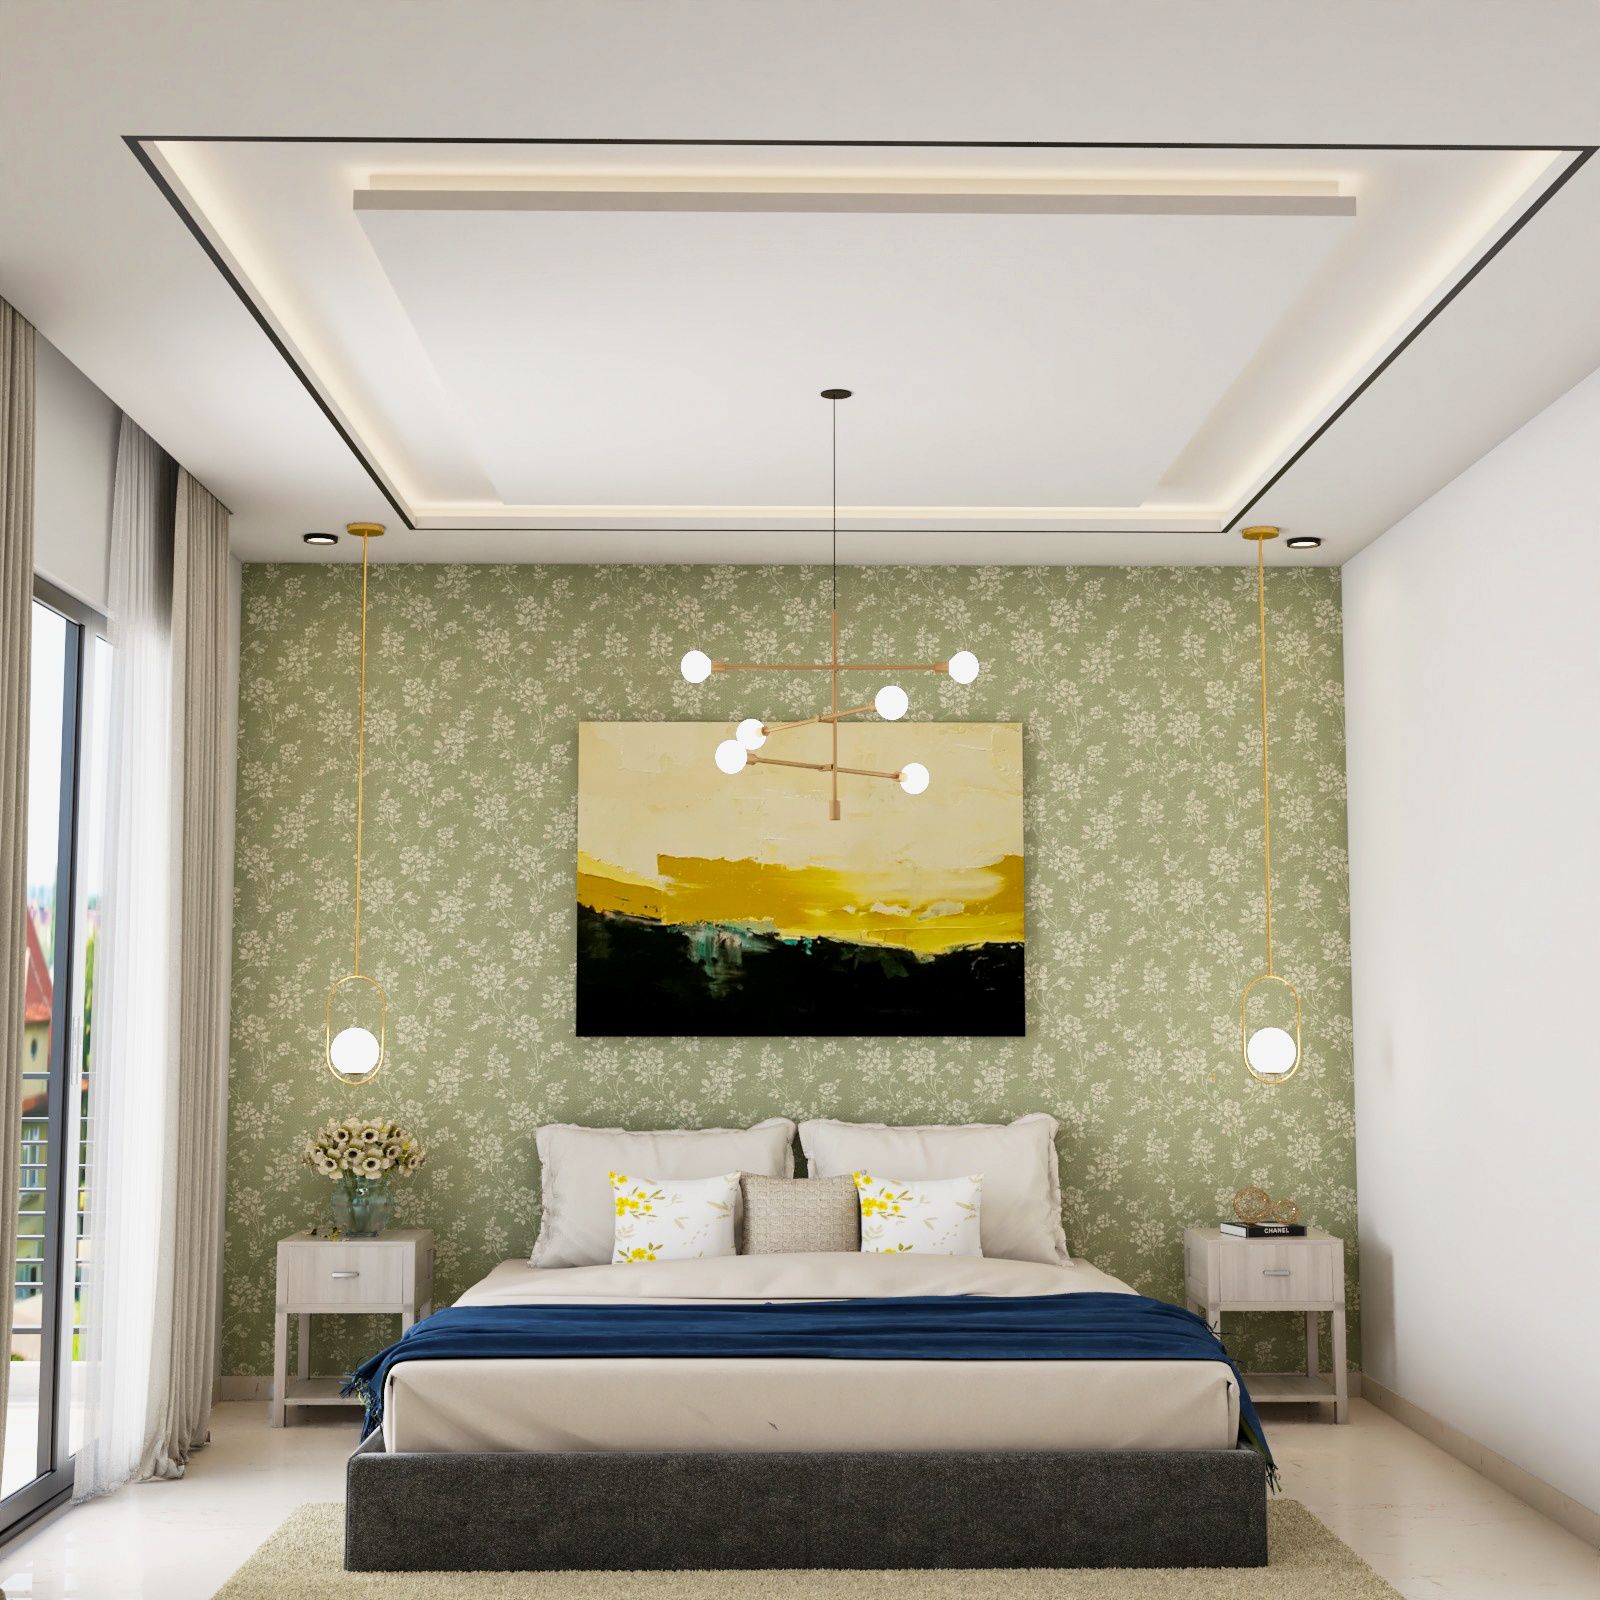 Rectangular Multilayered Bedroom Ceiling Design With Cove Lights And Green Floral Wallpaper Design